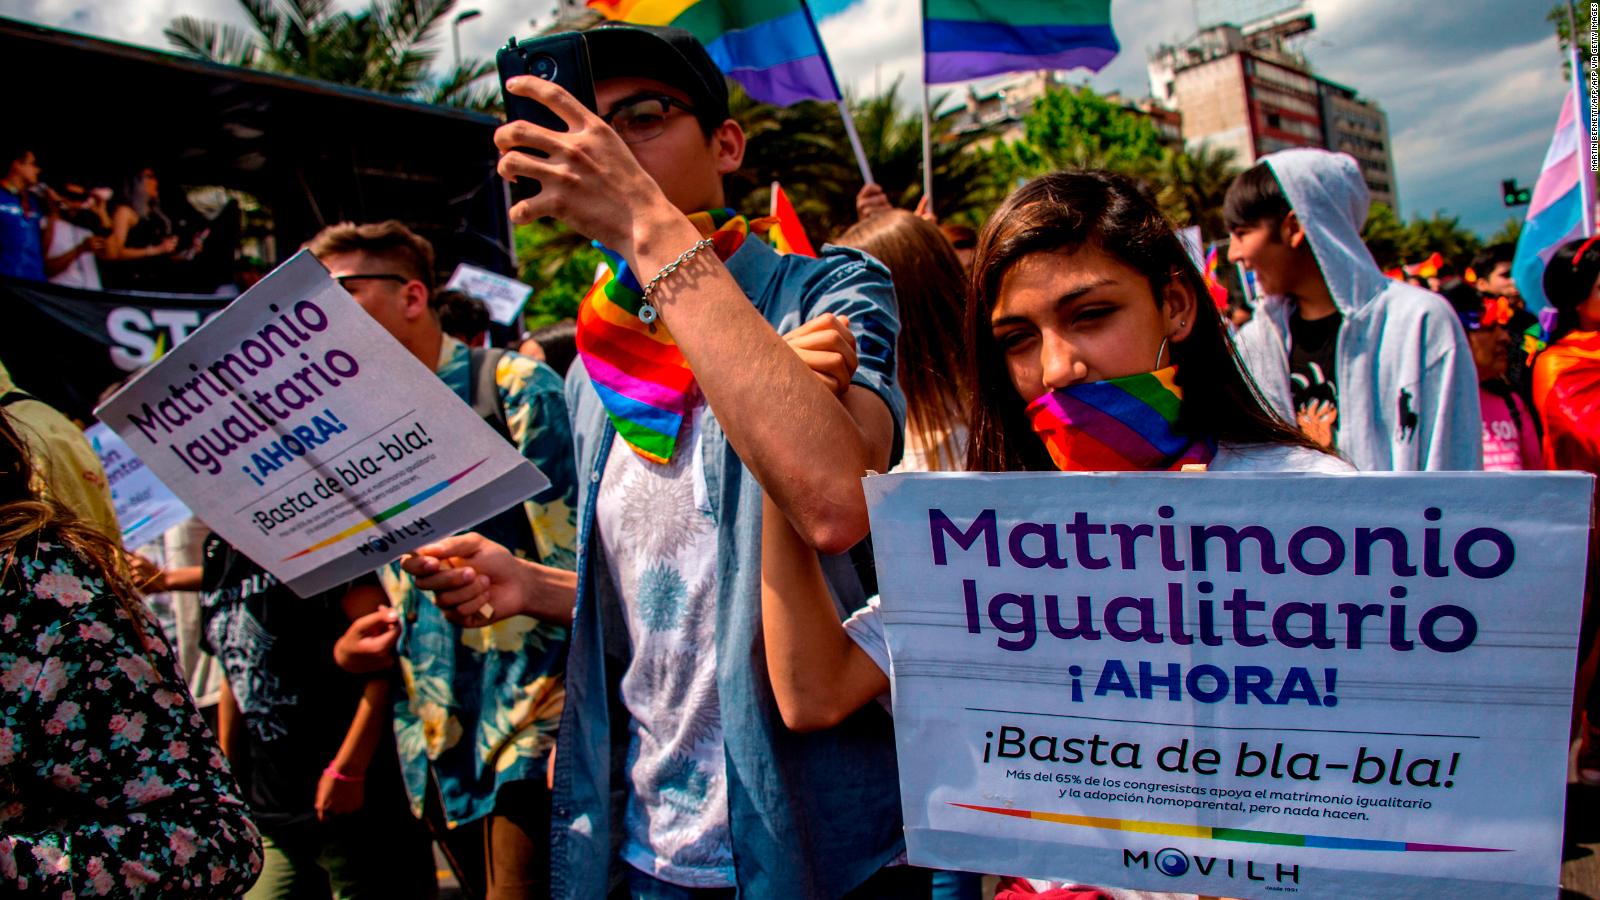 Chilean Congress approves equal marriage